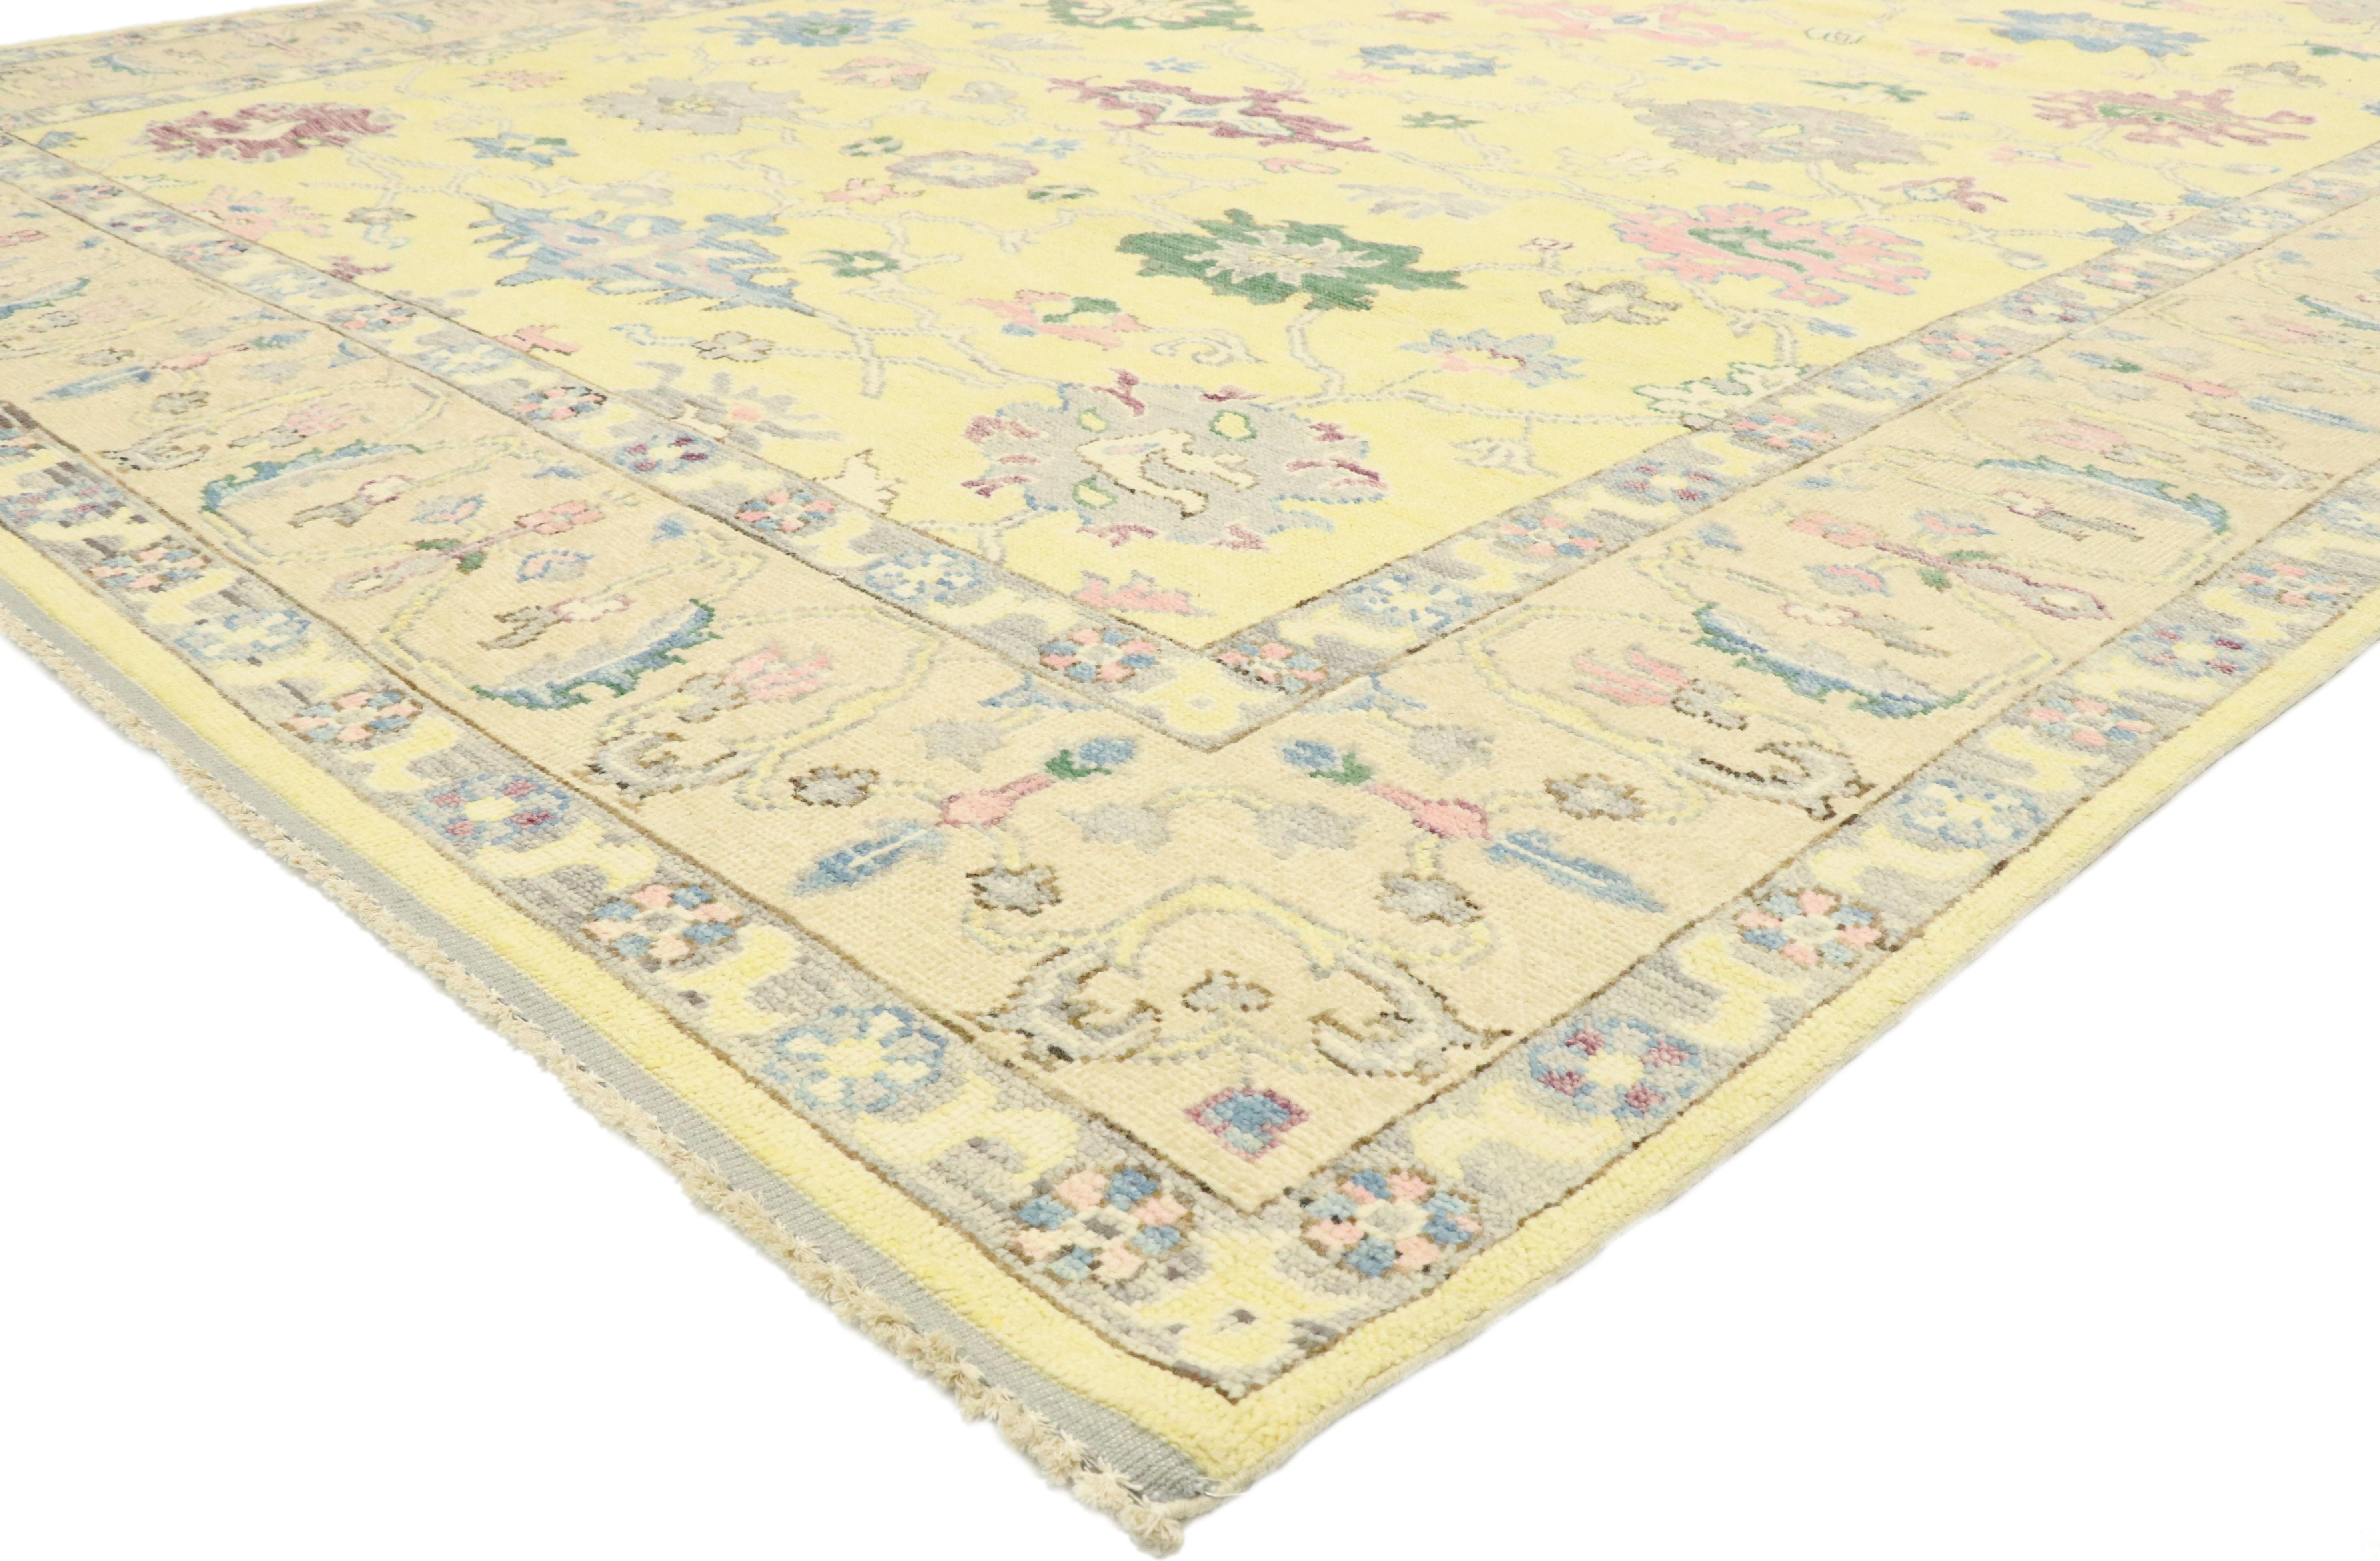 80601 New Contemporary Colorful Yellow Oushak rug with Modern Pastel style. Blending elements from the modern world with pastel colors, this hand knotted wool contemporary Oushak style area rug will boost the coziness factor in nearly any space. The